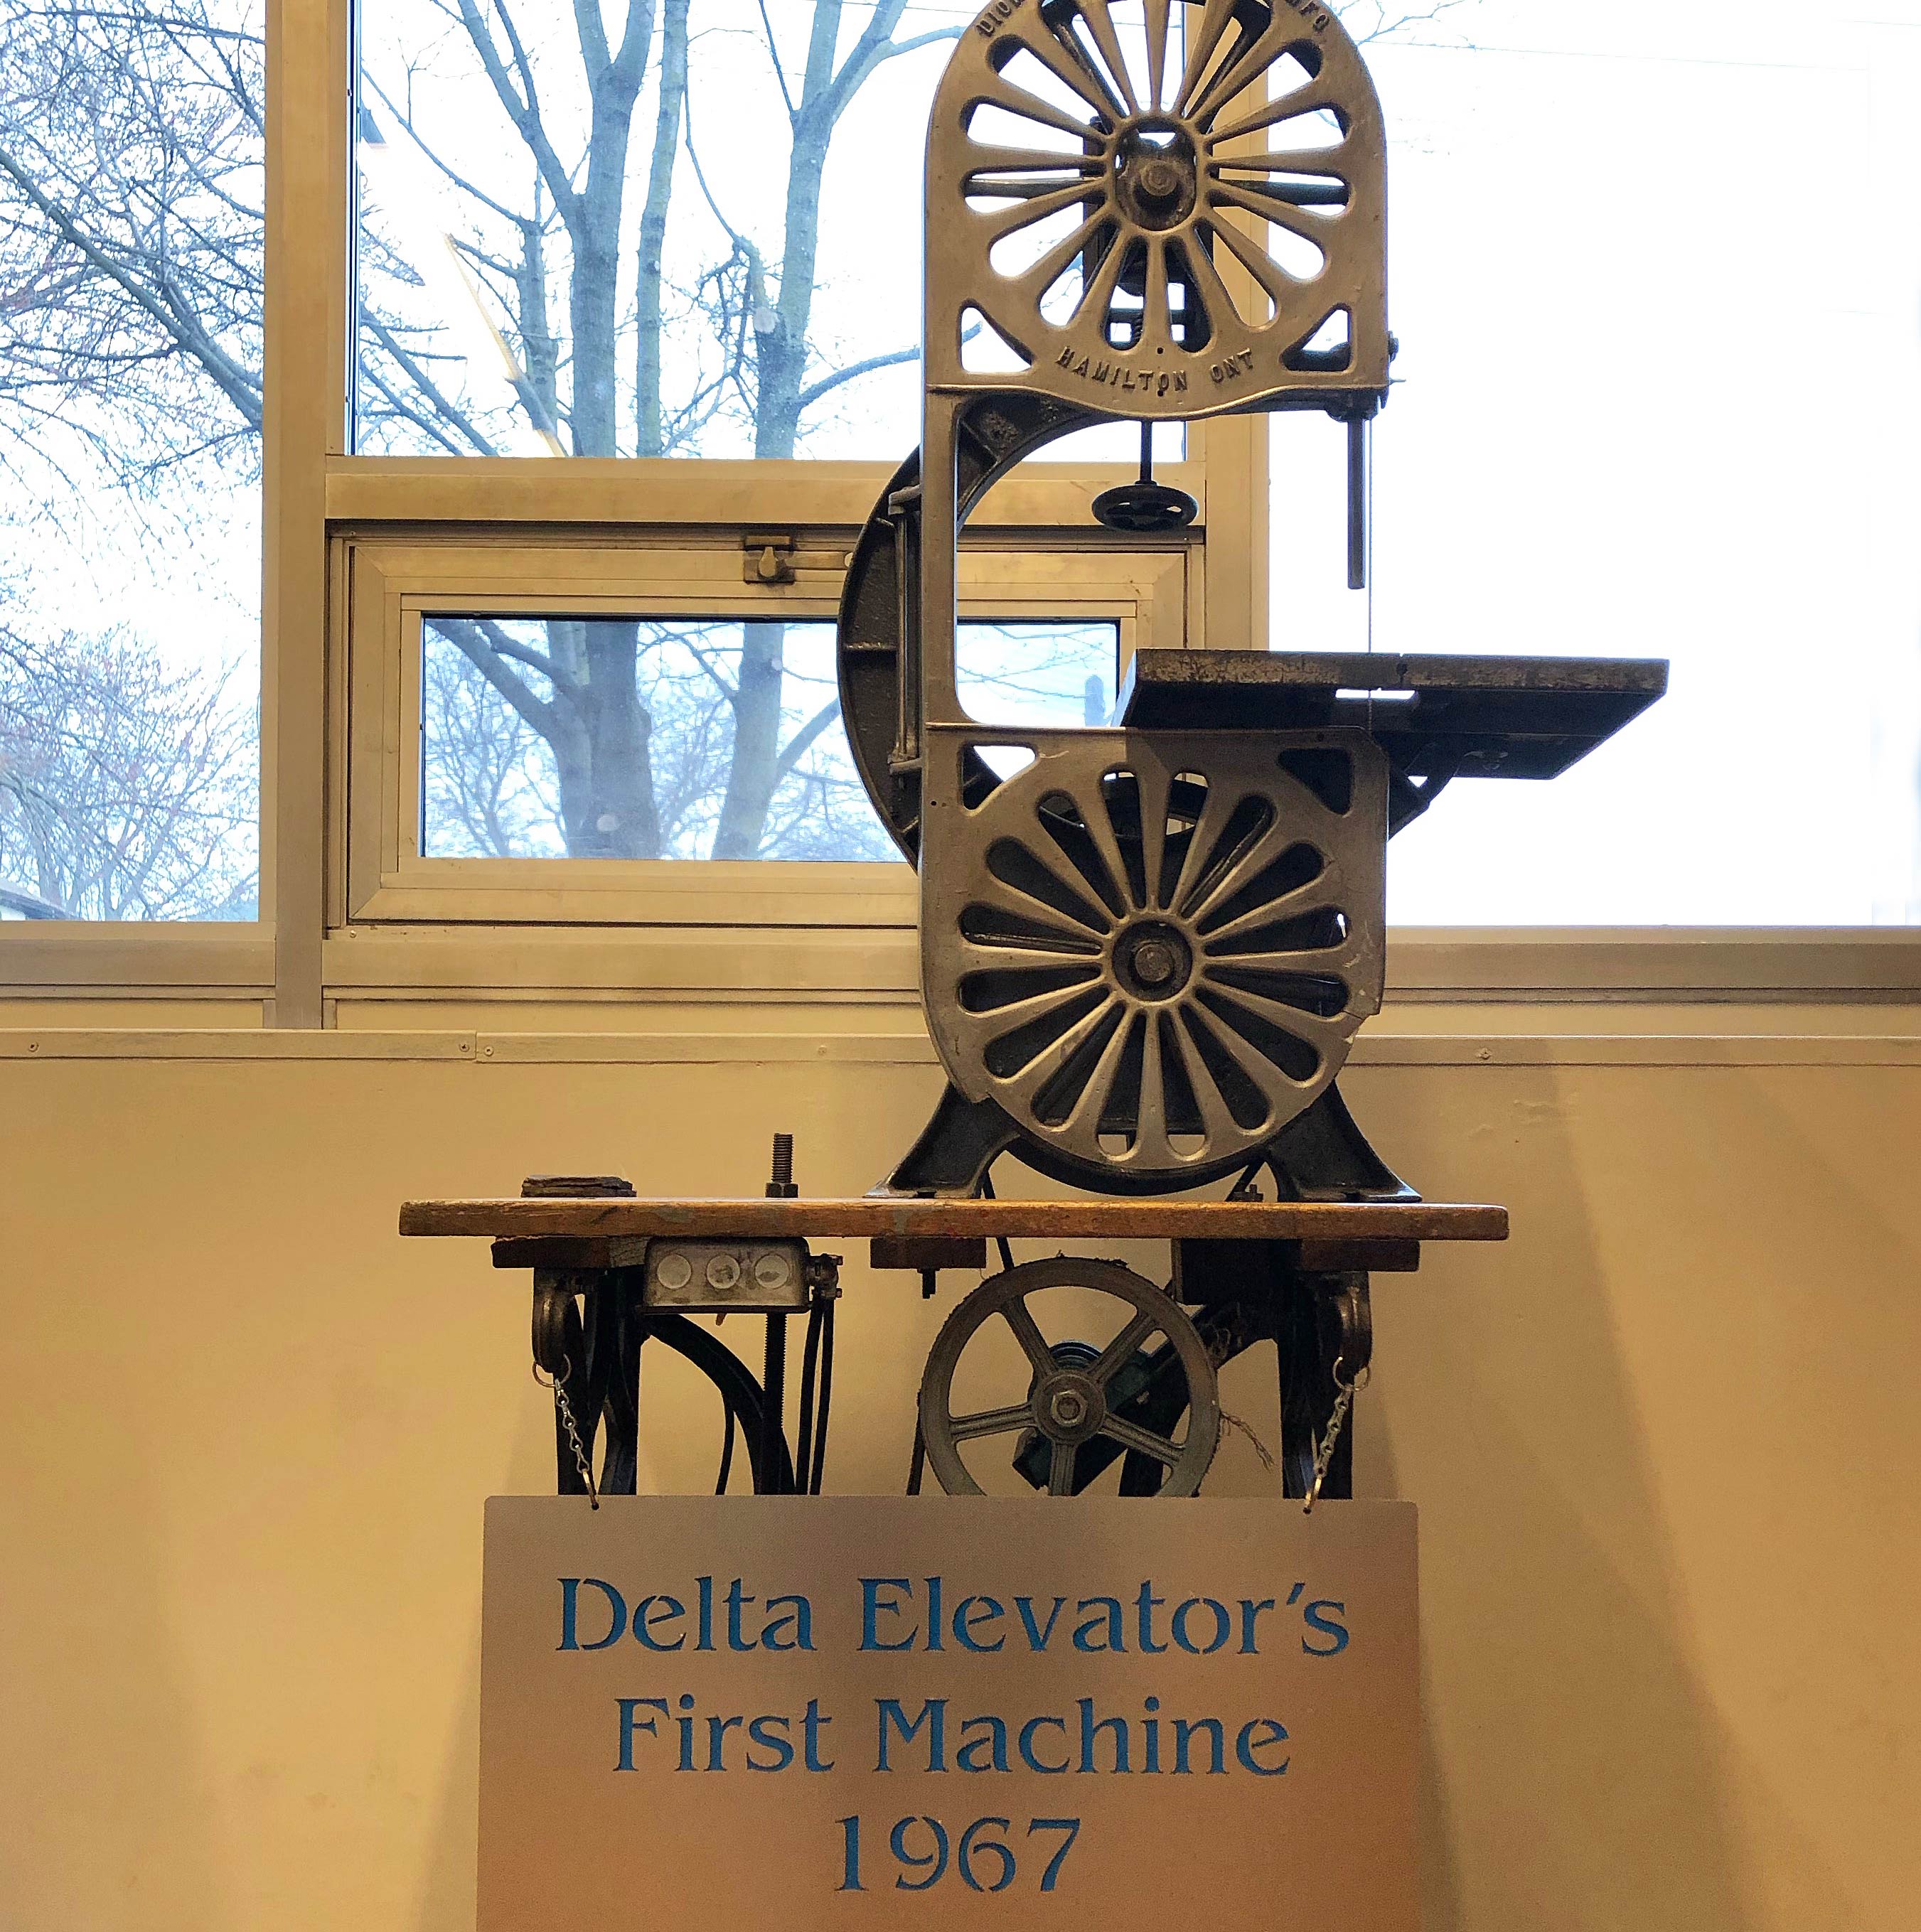 Picture of the original machine used in Delta Elevator's elevating systems